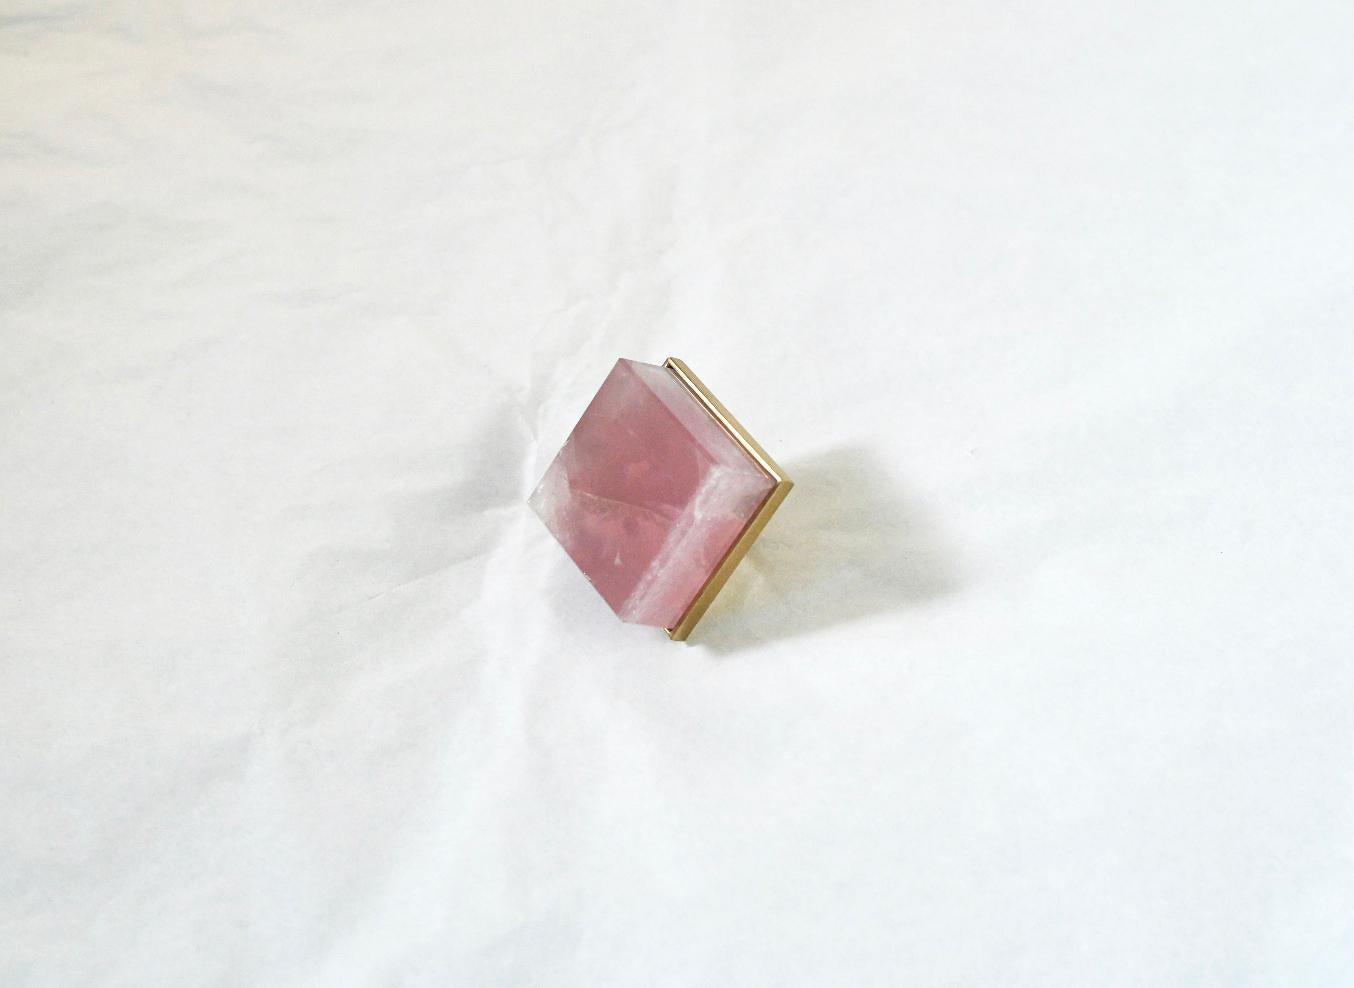 Cubic form rose rock crystal quartz knob with polished brass base. Created by Phoenix Gallery, NYC.
Custome size and finish upon request.